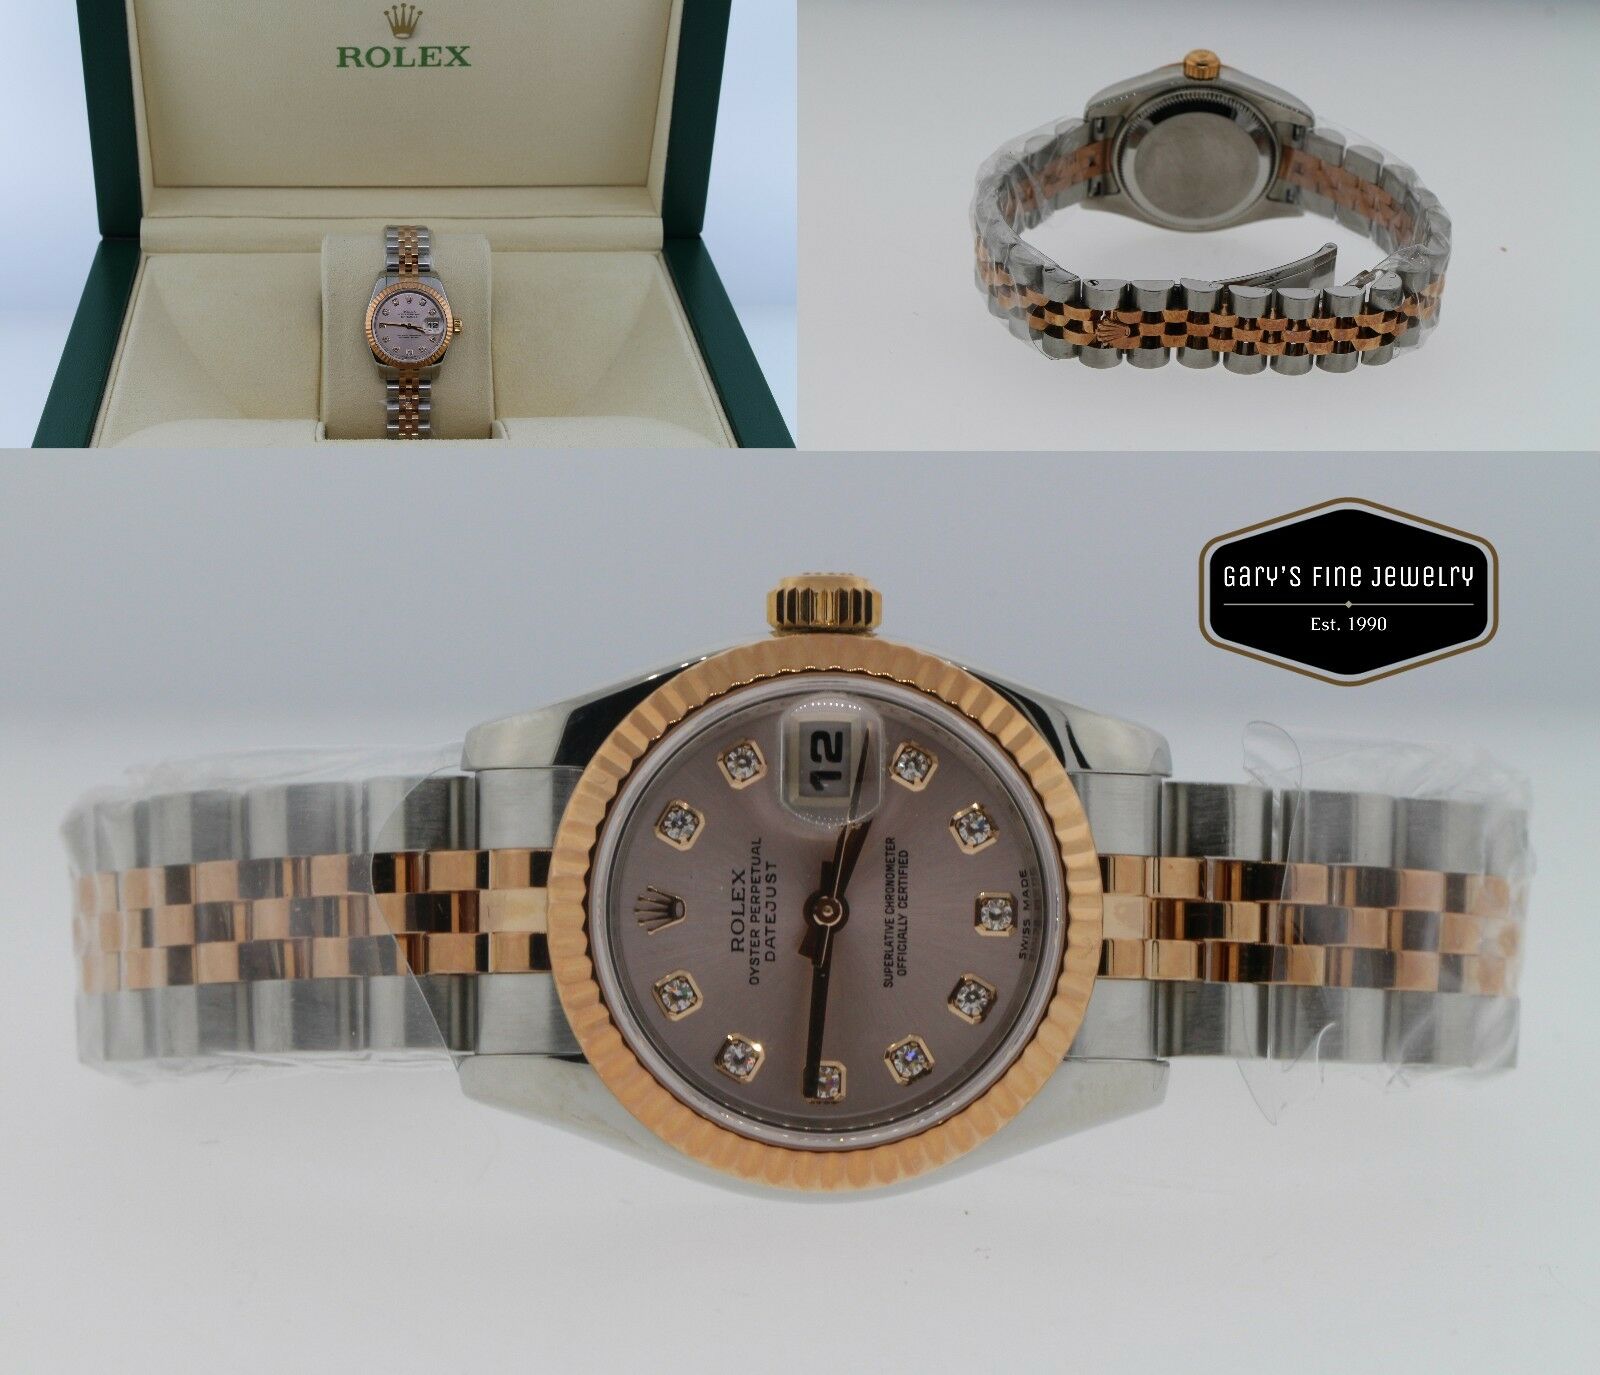 Rolex Datejust 179171PDJ Two Tone 18K Rose Gold/Stainless Steel 26mm Watch